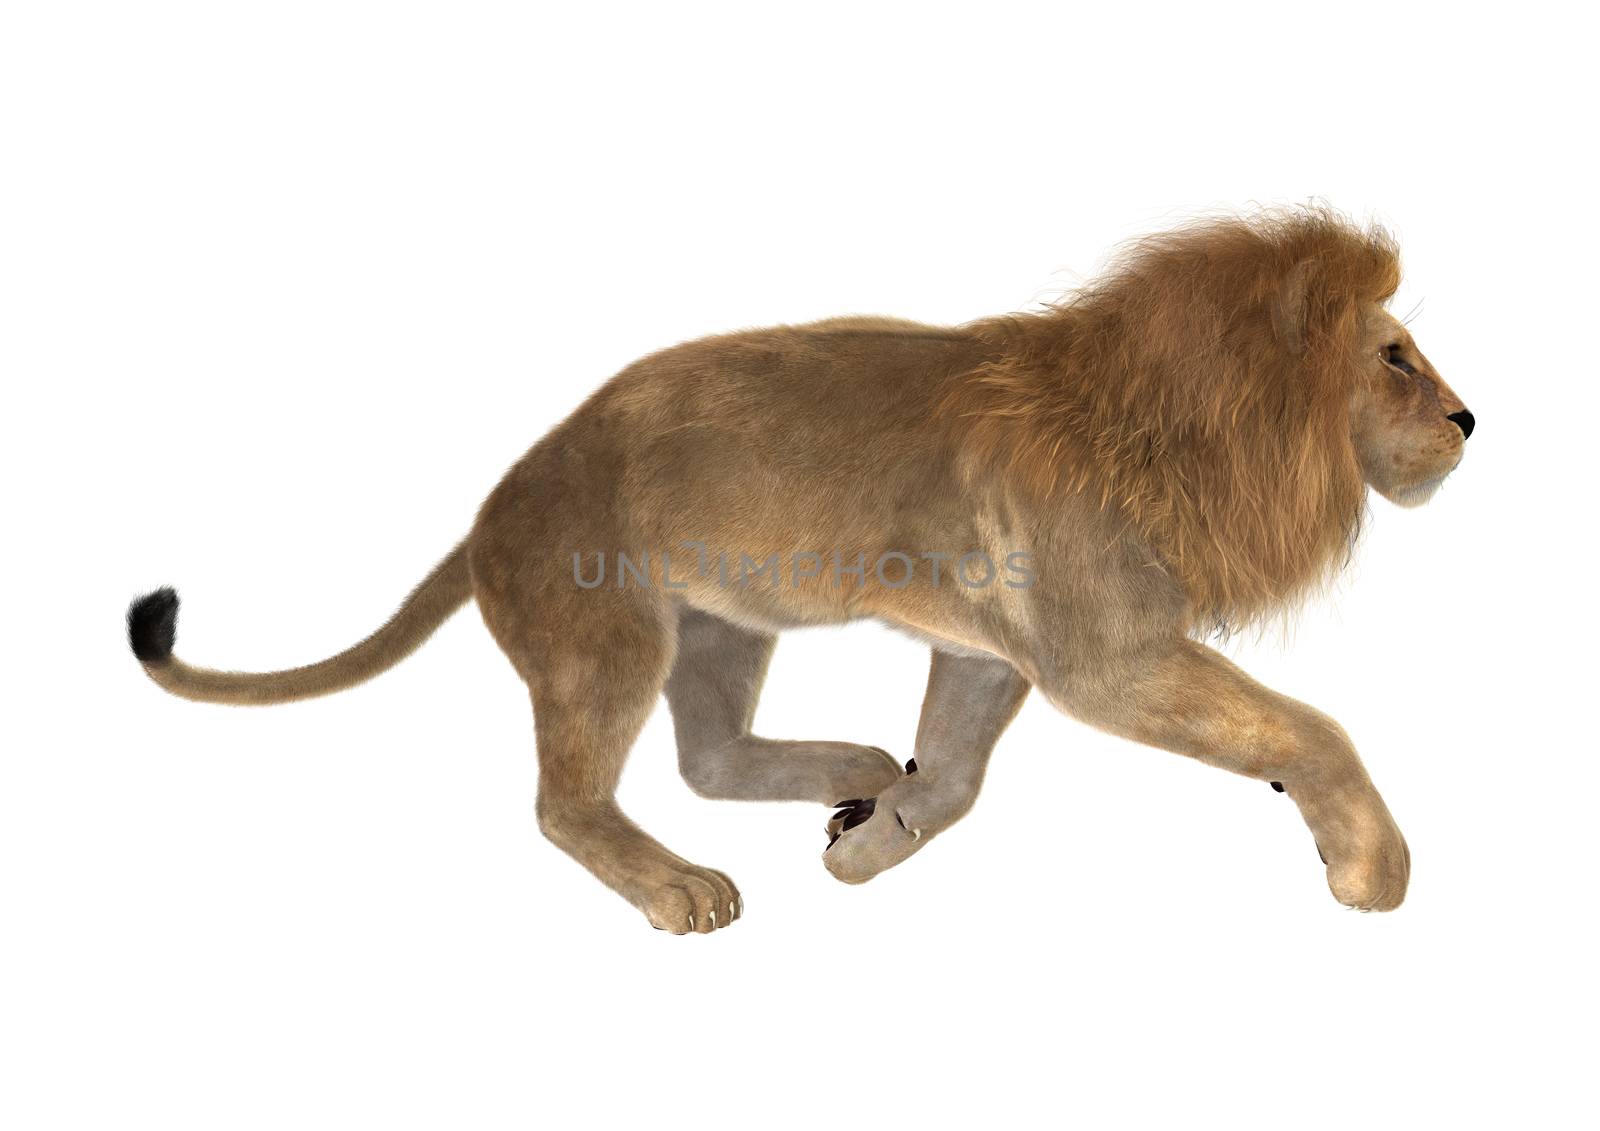 Male Lion by Vac